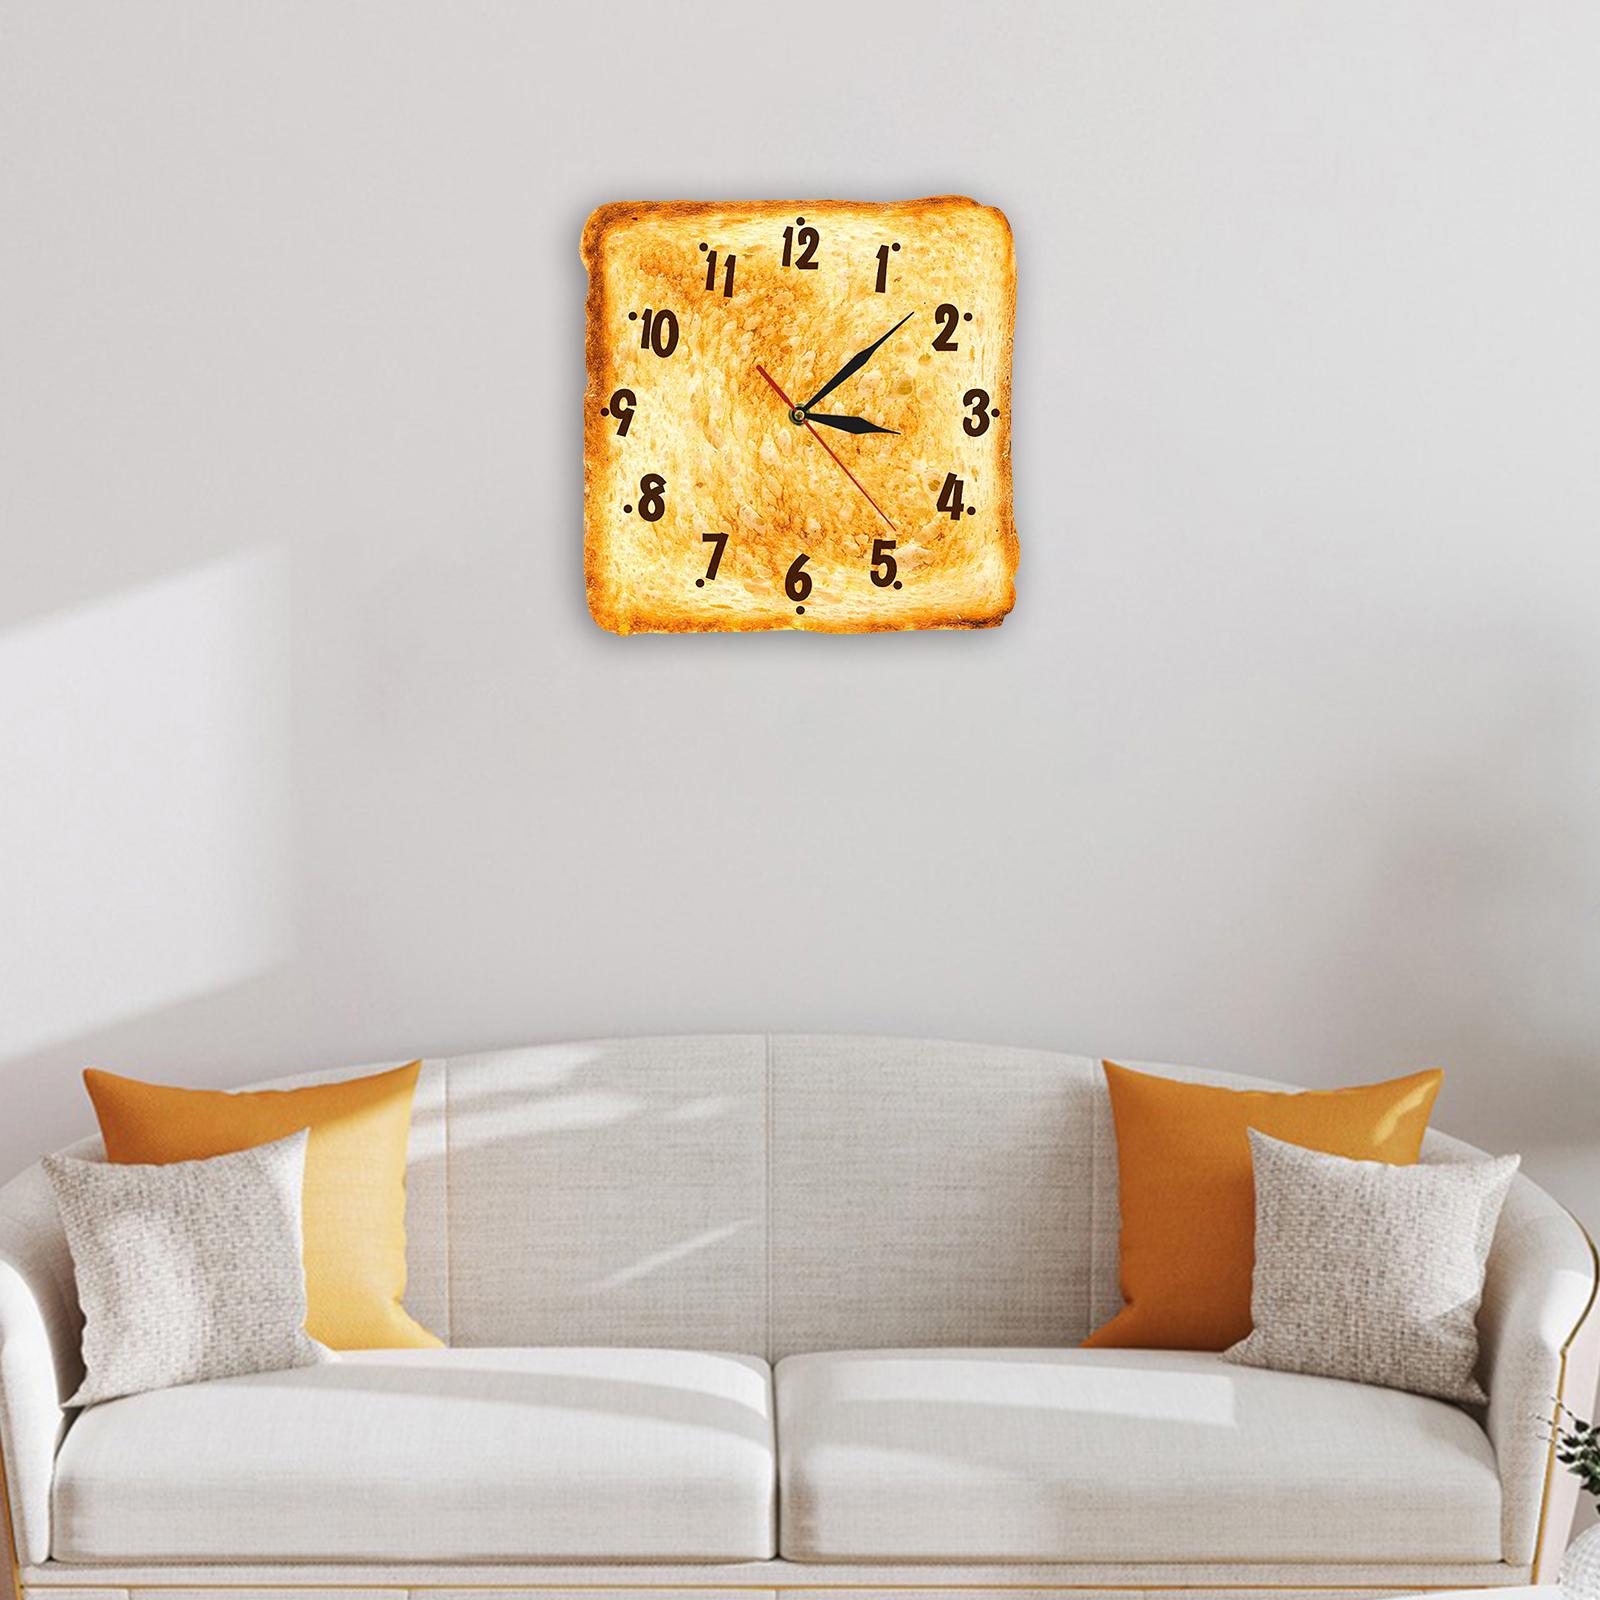 Toasted Bread Wall Clock Gourmet Silent Wall Art for Dining Room Kitchen